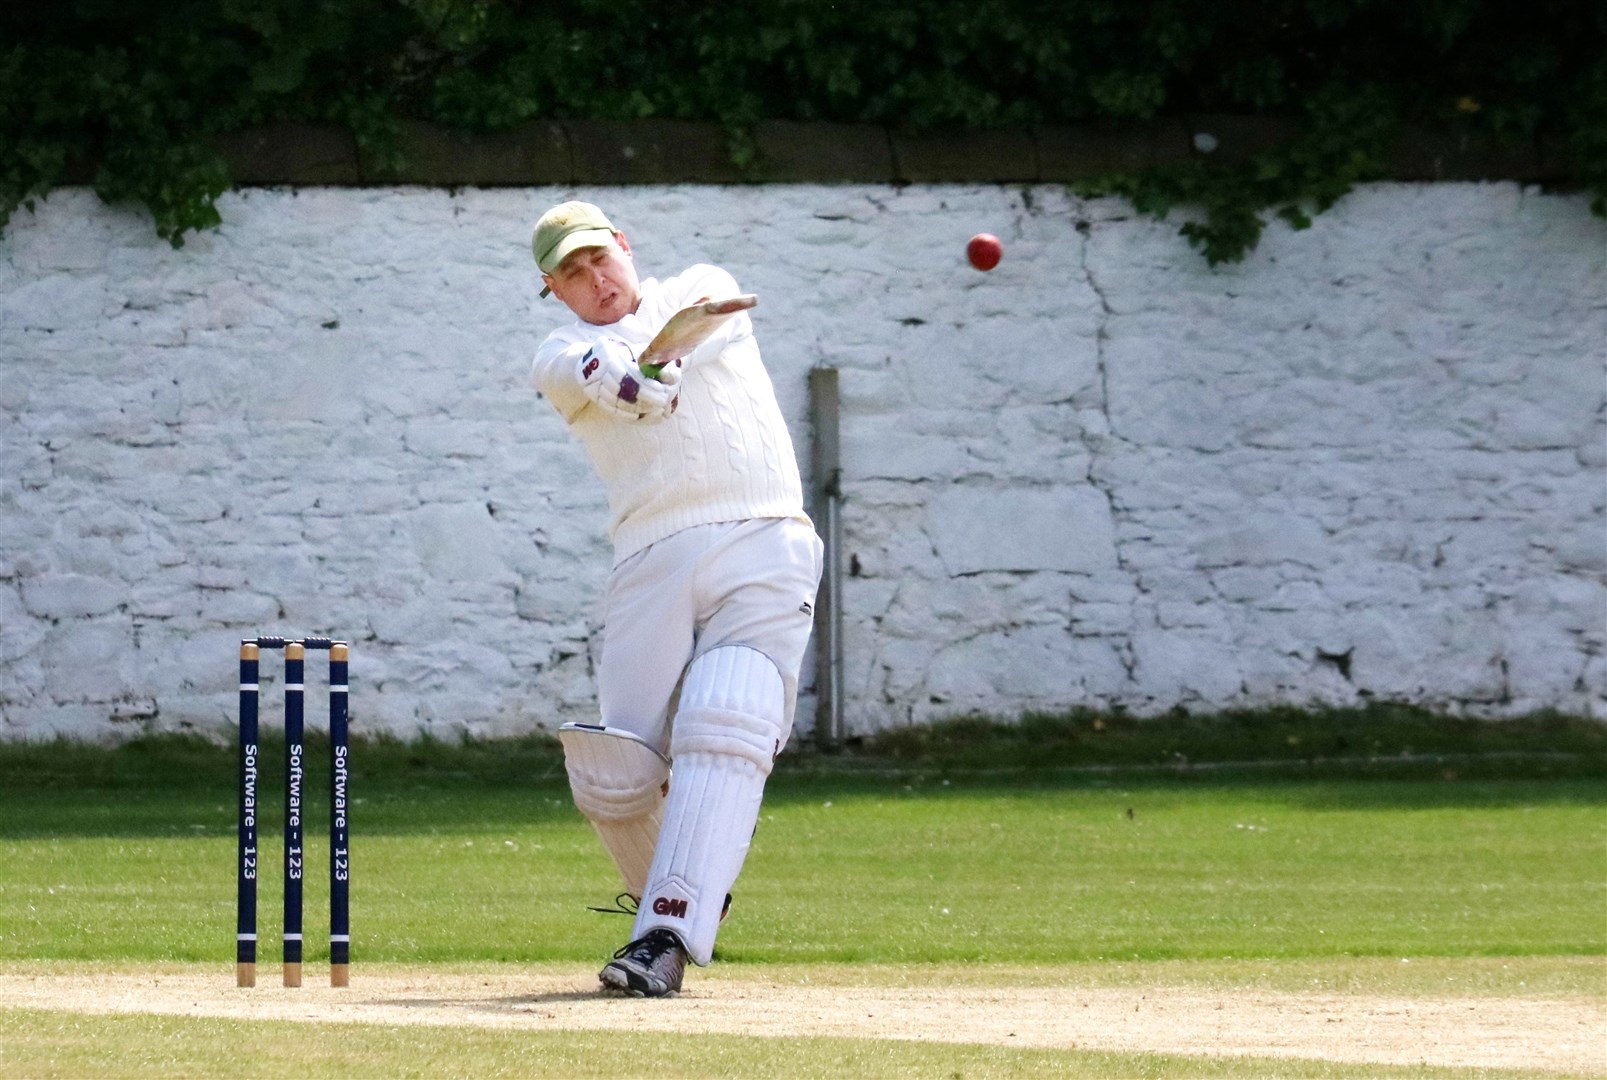 Ross County captain Graeme Carney played a leading role with the bat in the semi final against Northern Counties. Picture: James Mackenzie